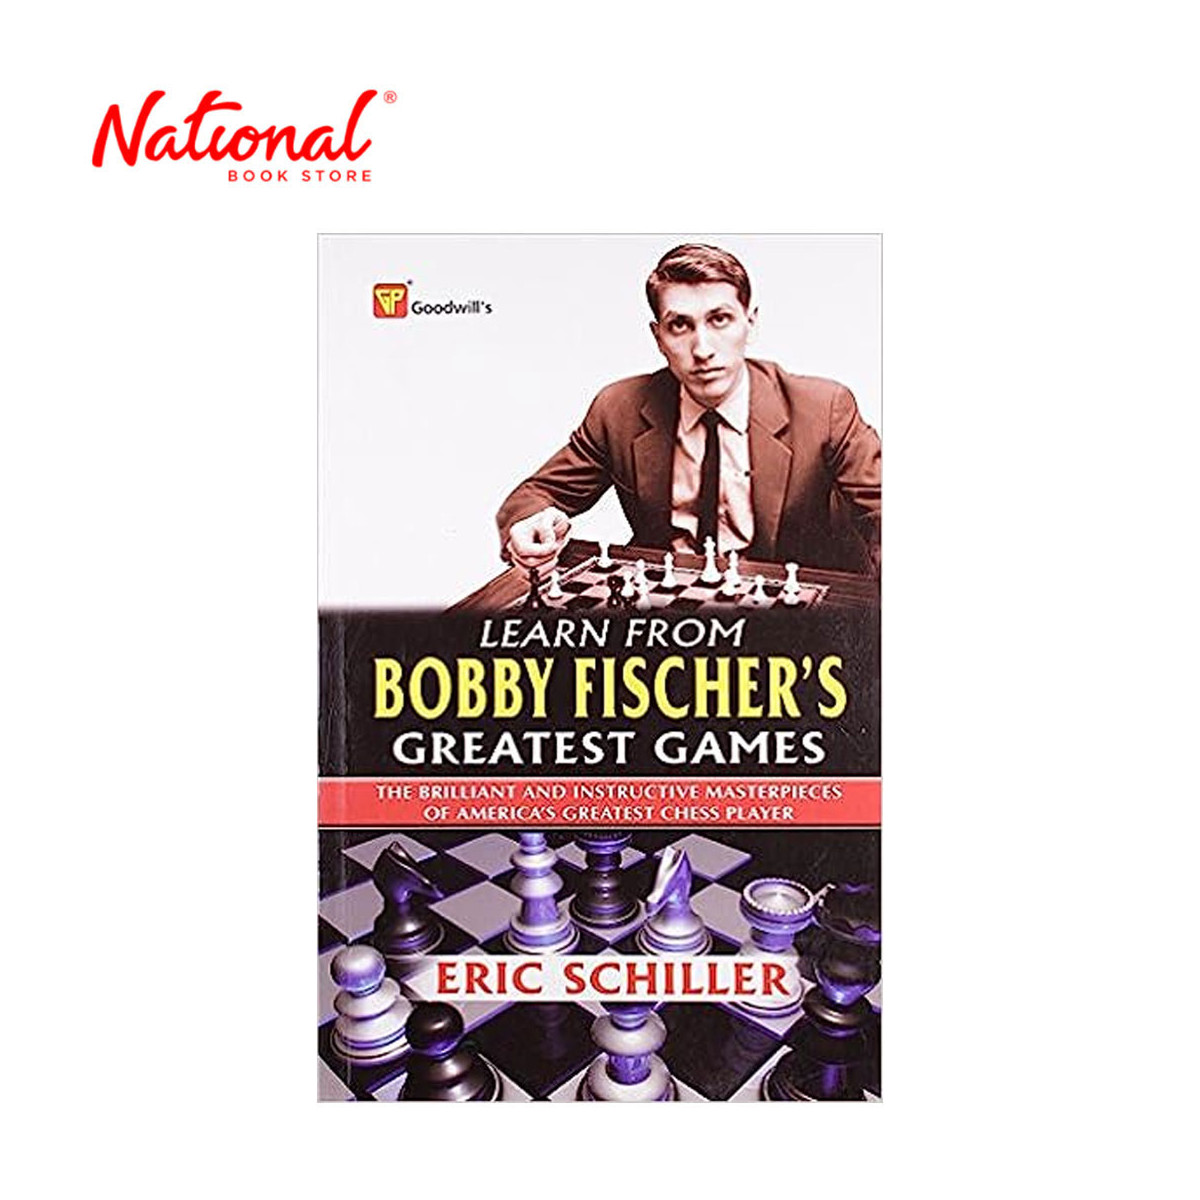 Learn From Bobby Fischer's Greatest Games by Eric Schiller - Trade Paperback - Entertainment